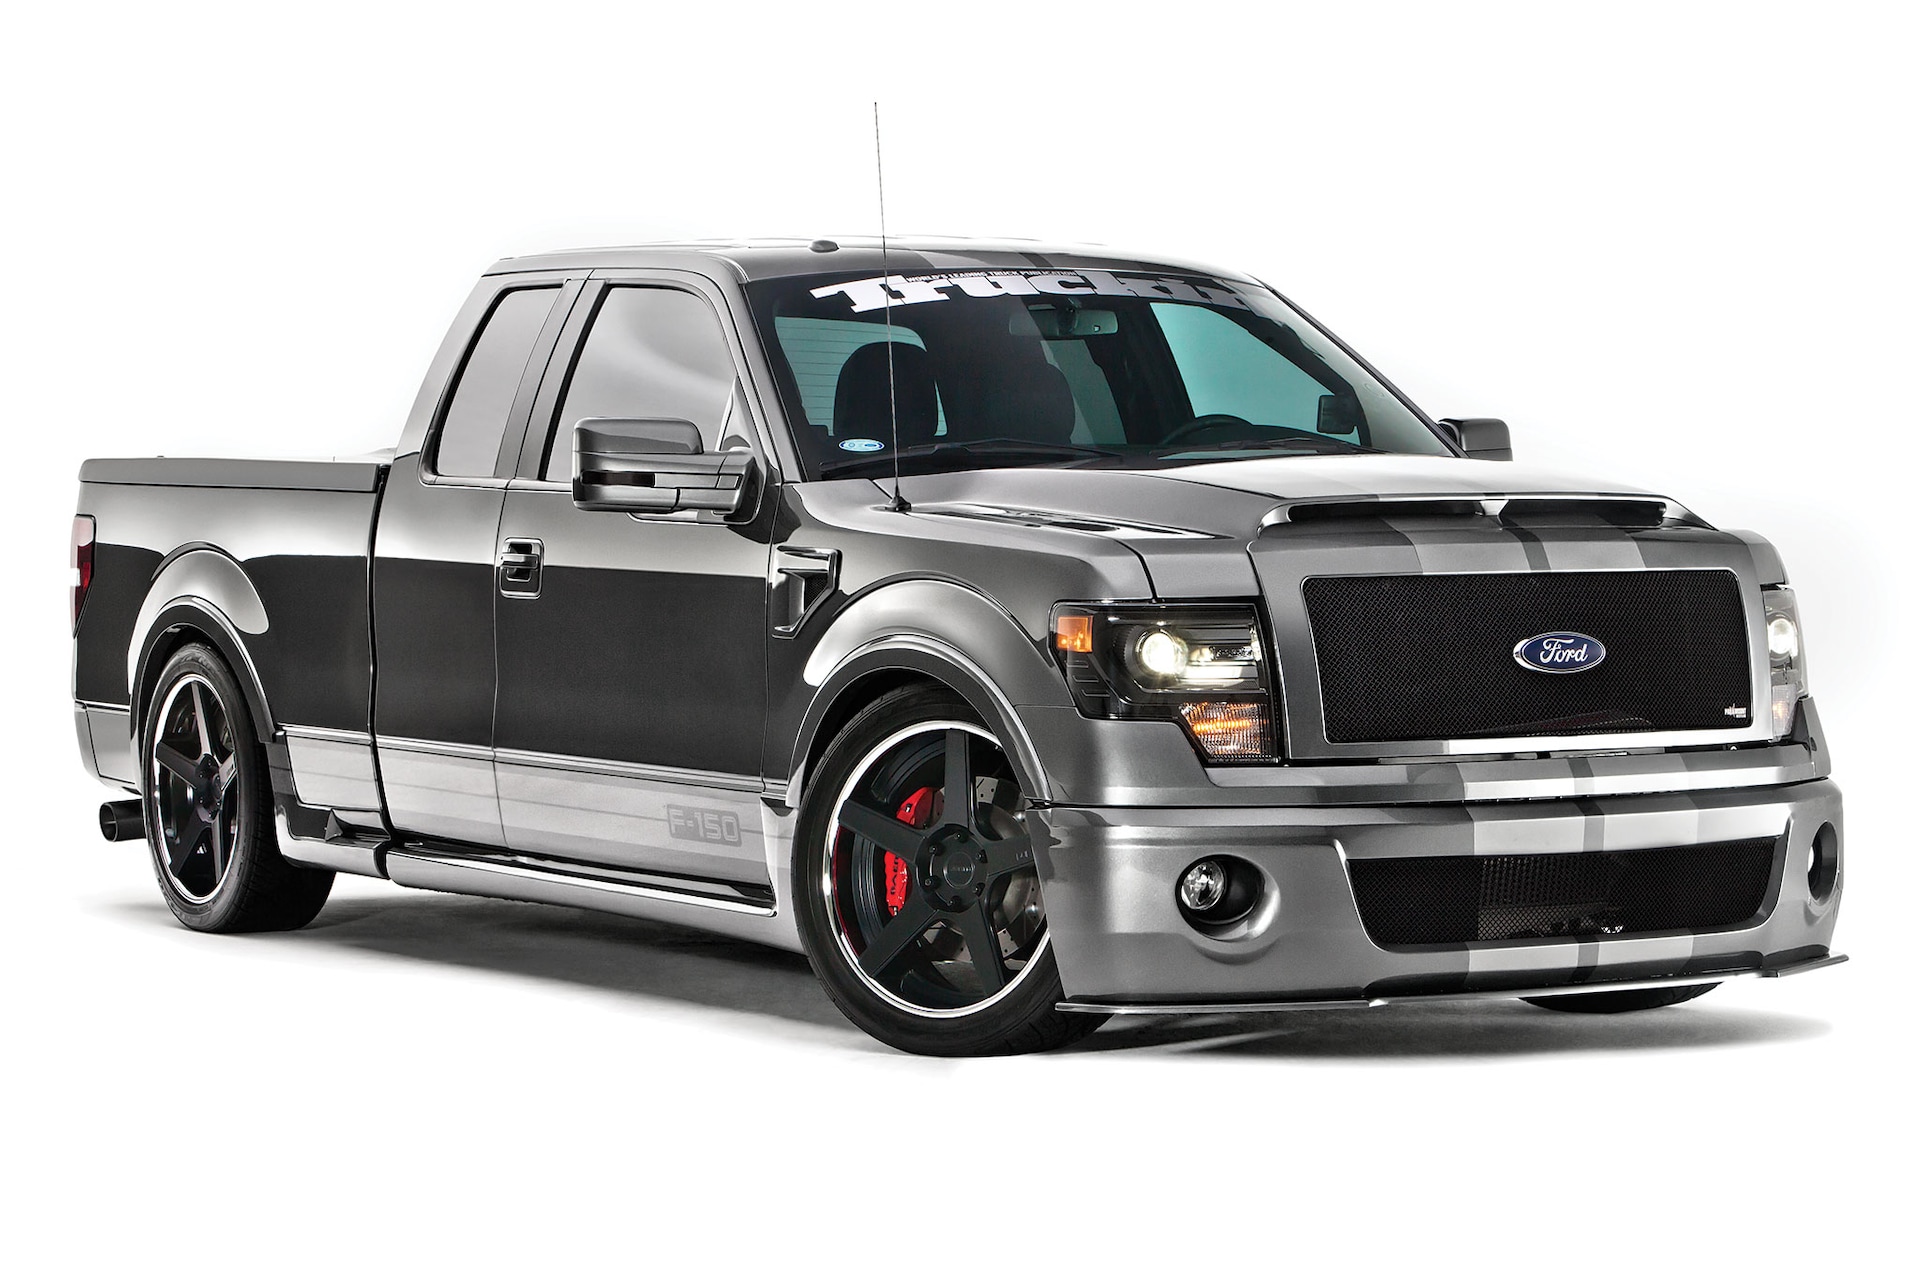 2013 Ford F-150 FX2 EcoBoost - Project GT-150 Wrap-up